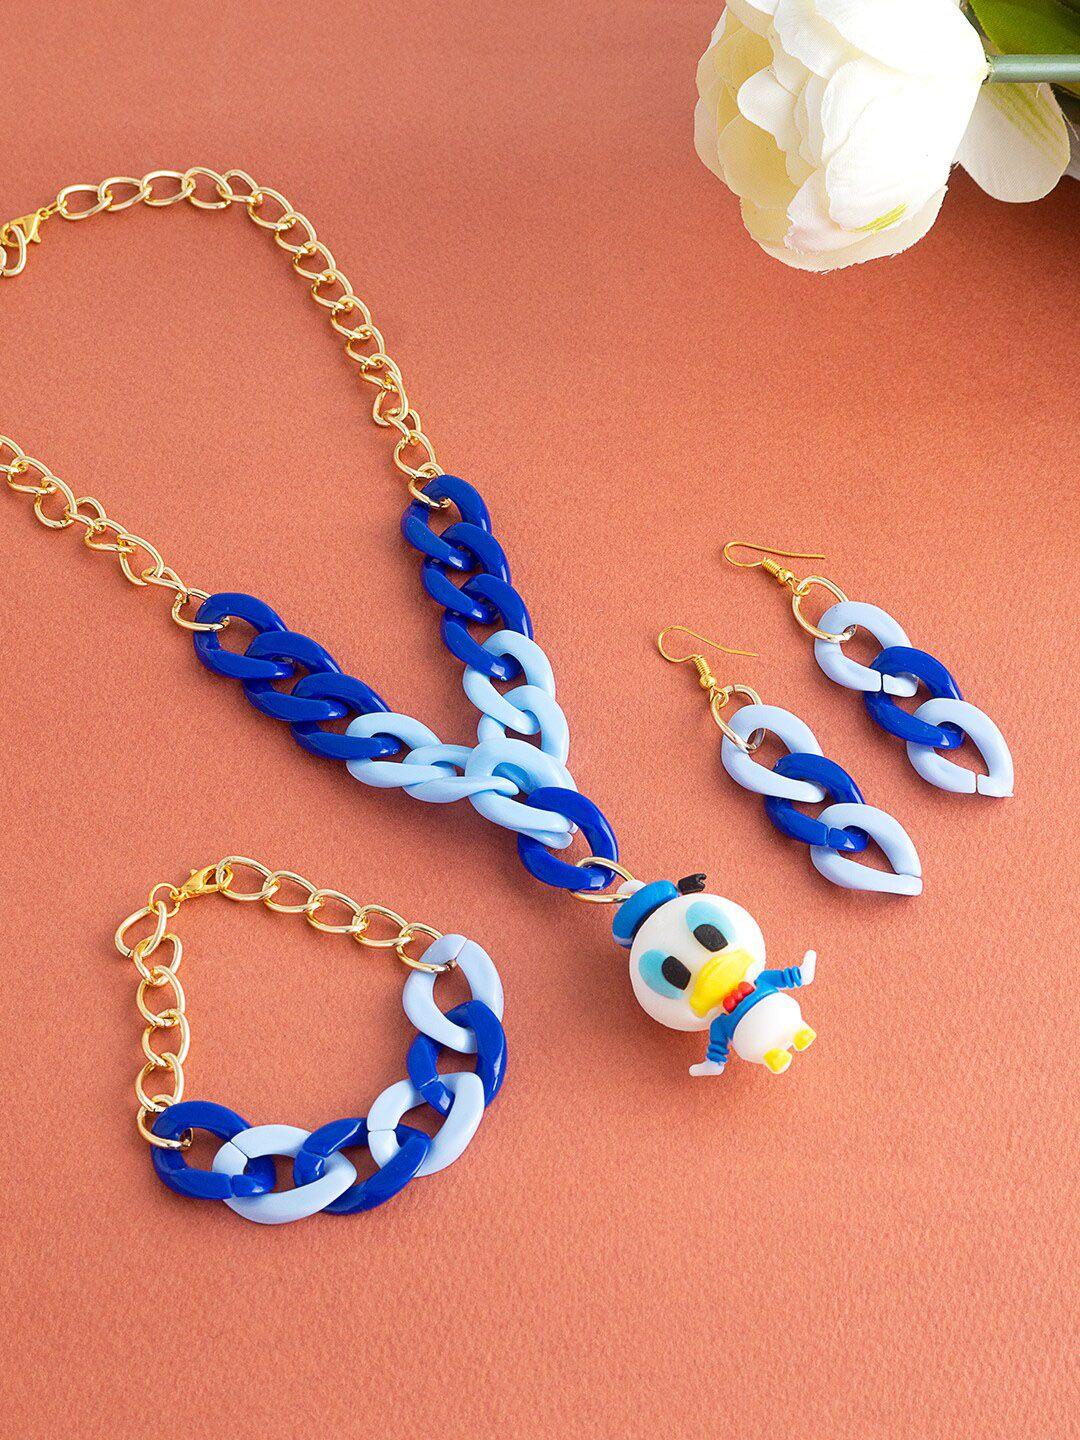 golden peacock gold-toned navy blue donald duck charm necklace with bracelet & earrings set